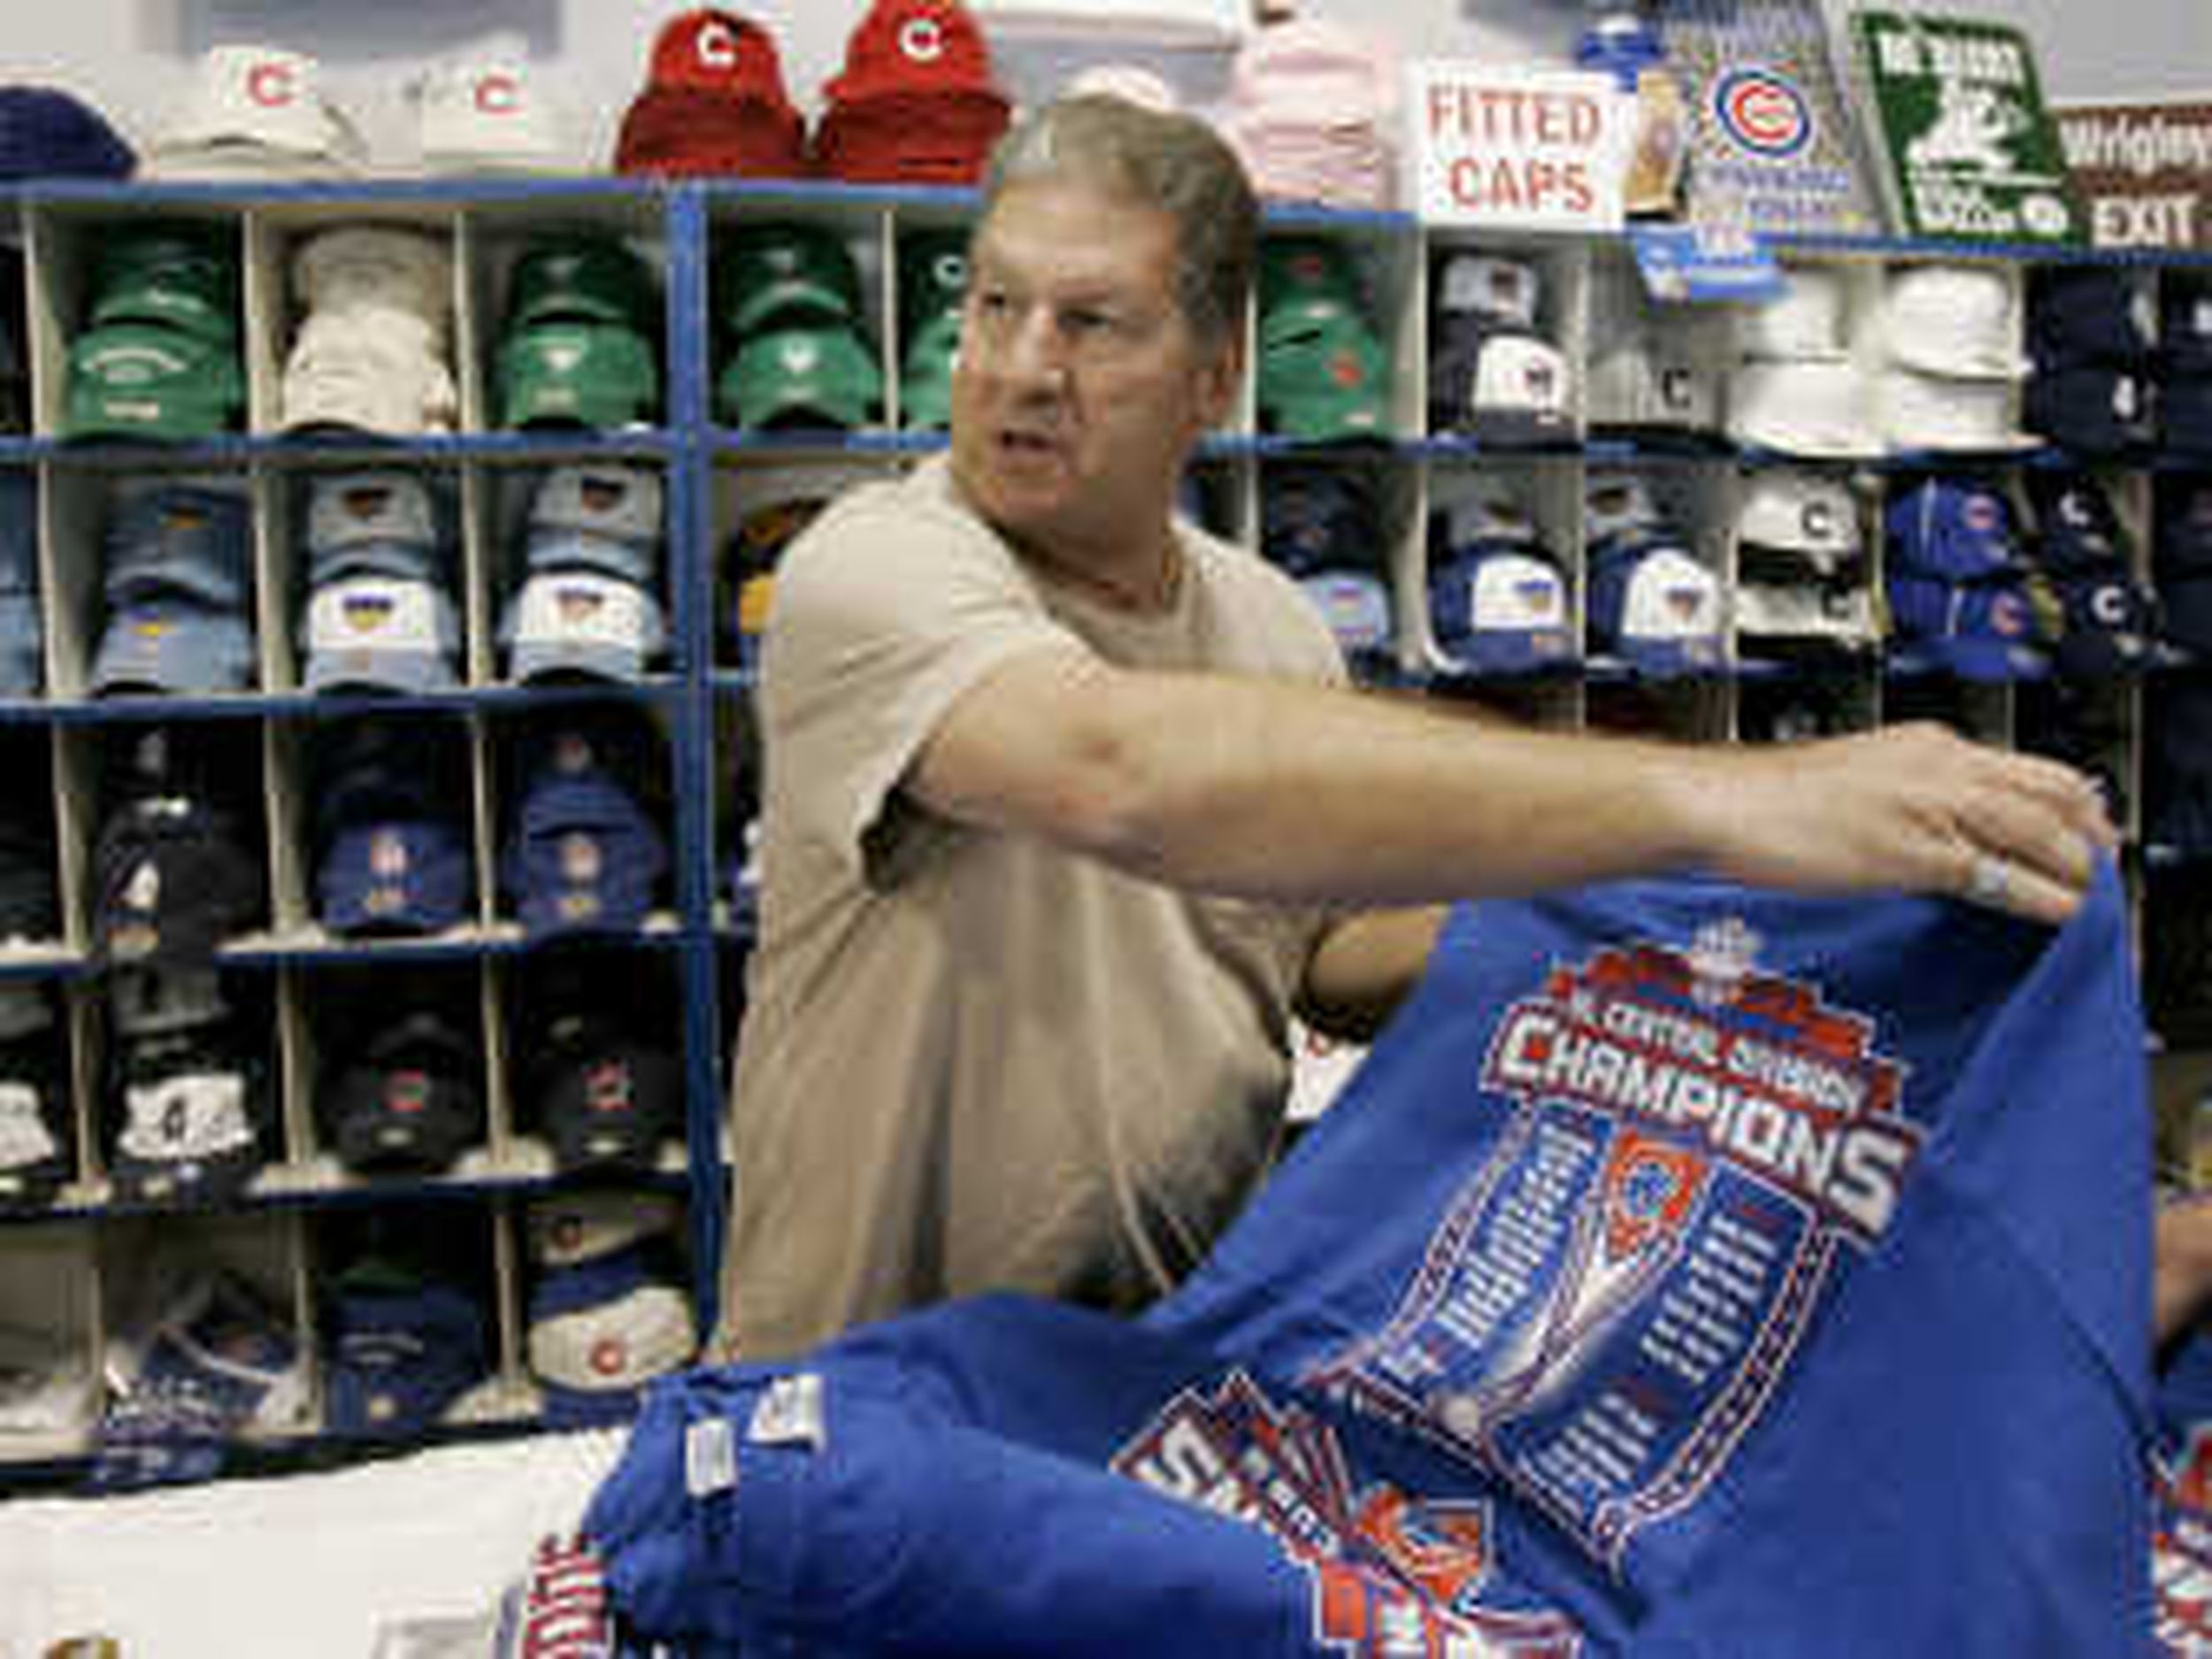 Long-suffering fans, Cinderella potential fuel baseball playoff sales